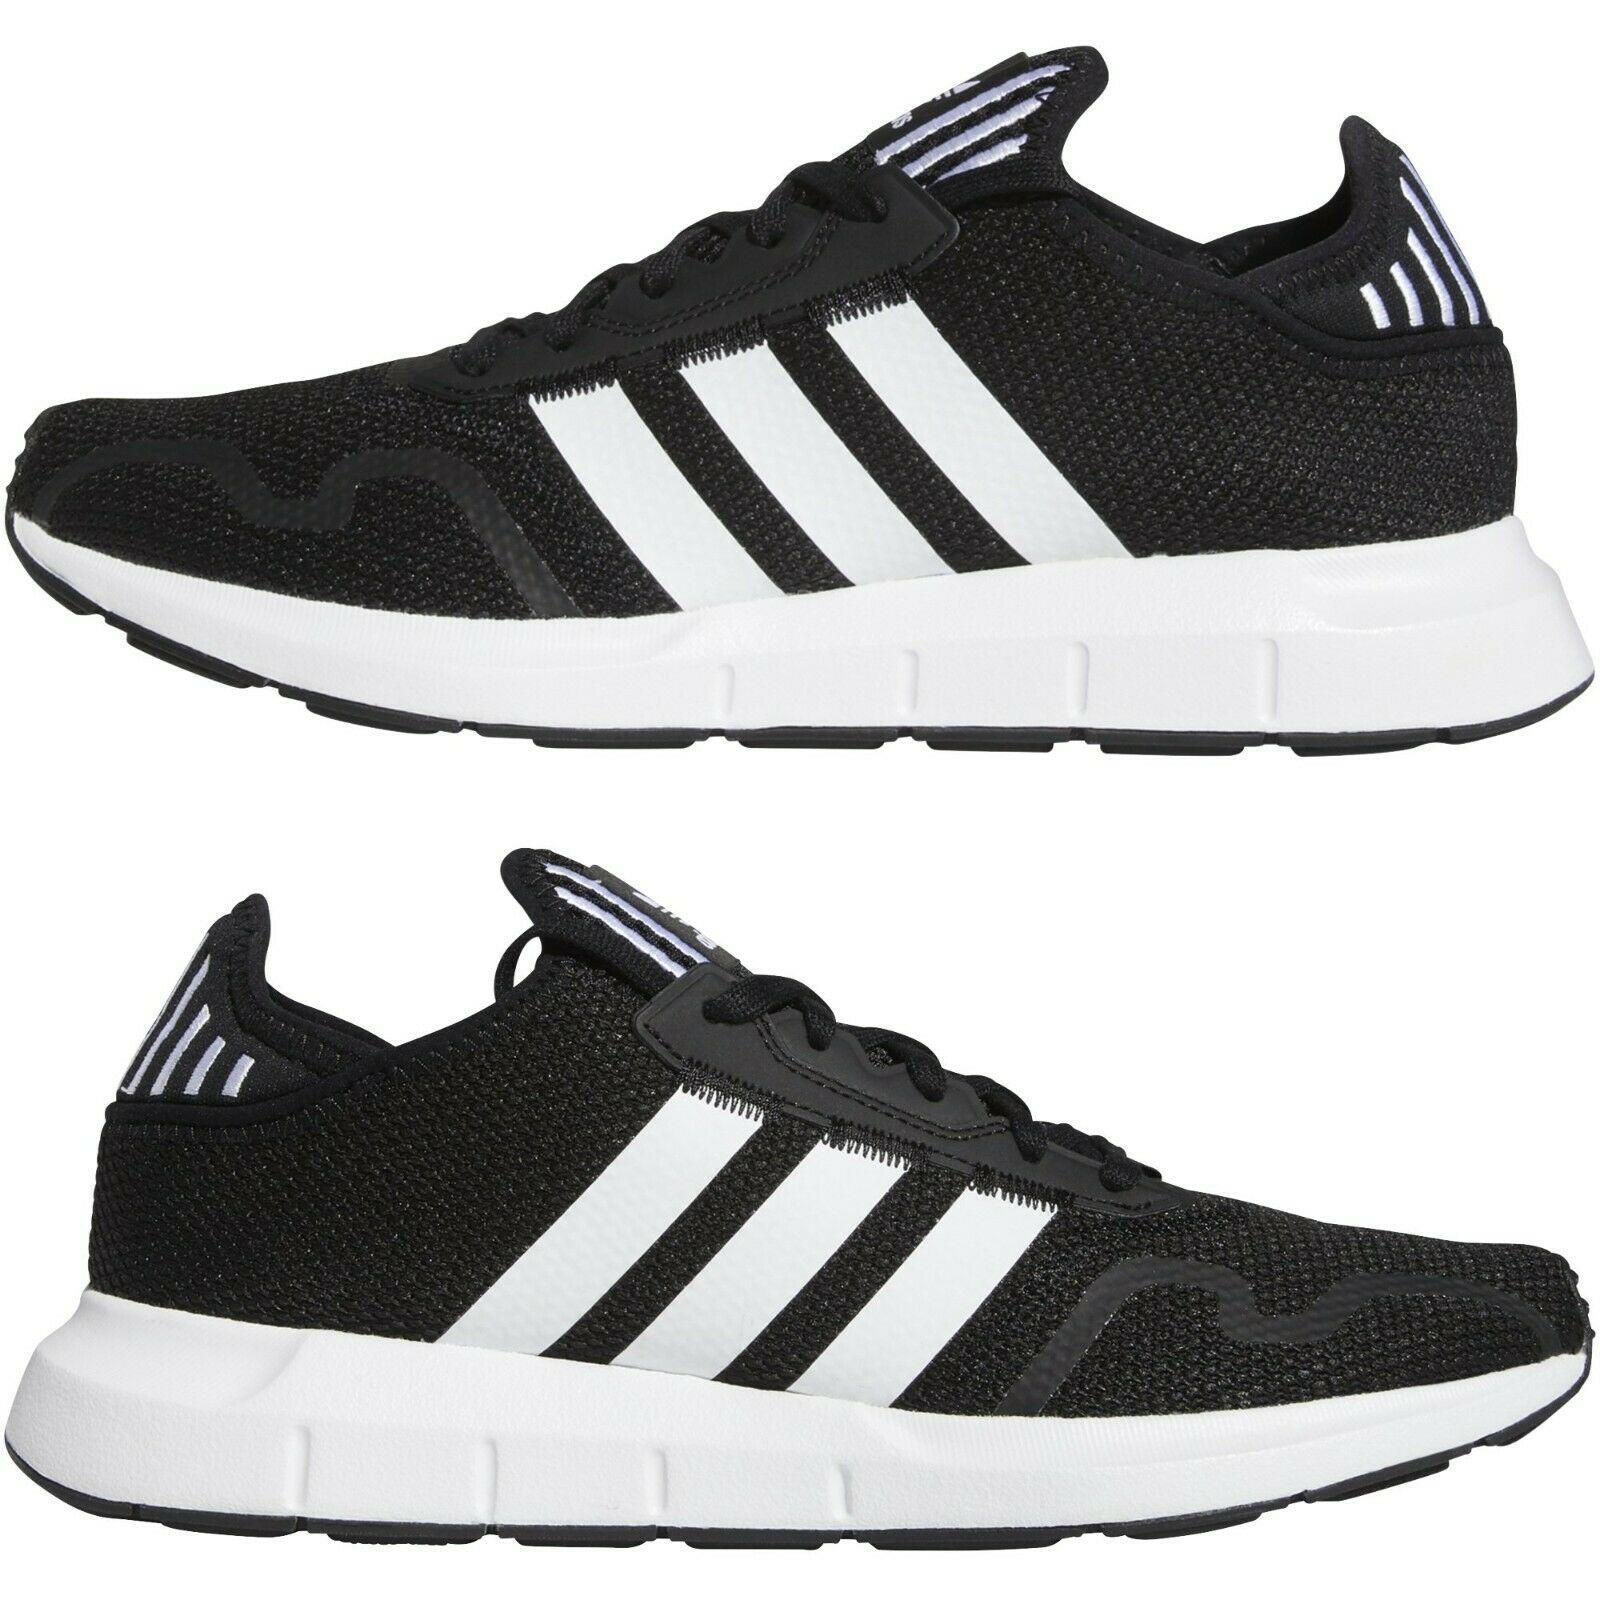 Adidas Classic Swift X Run Black Running and Jogging Sneakers Shoes For Women